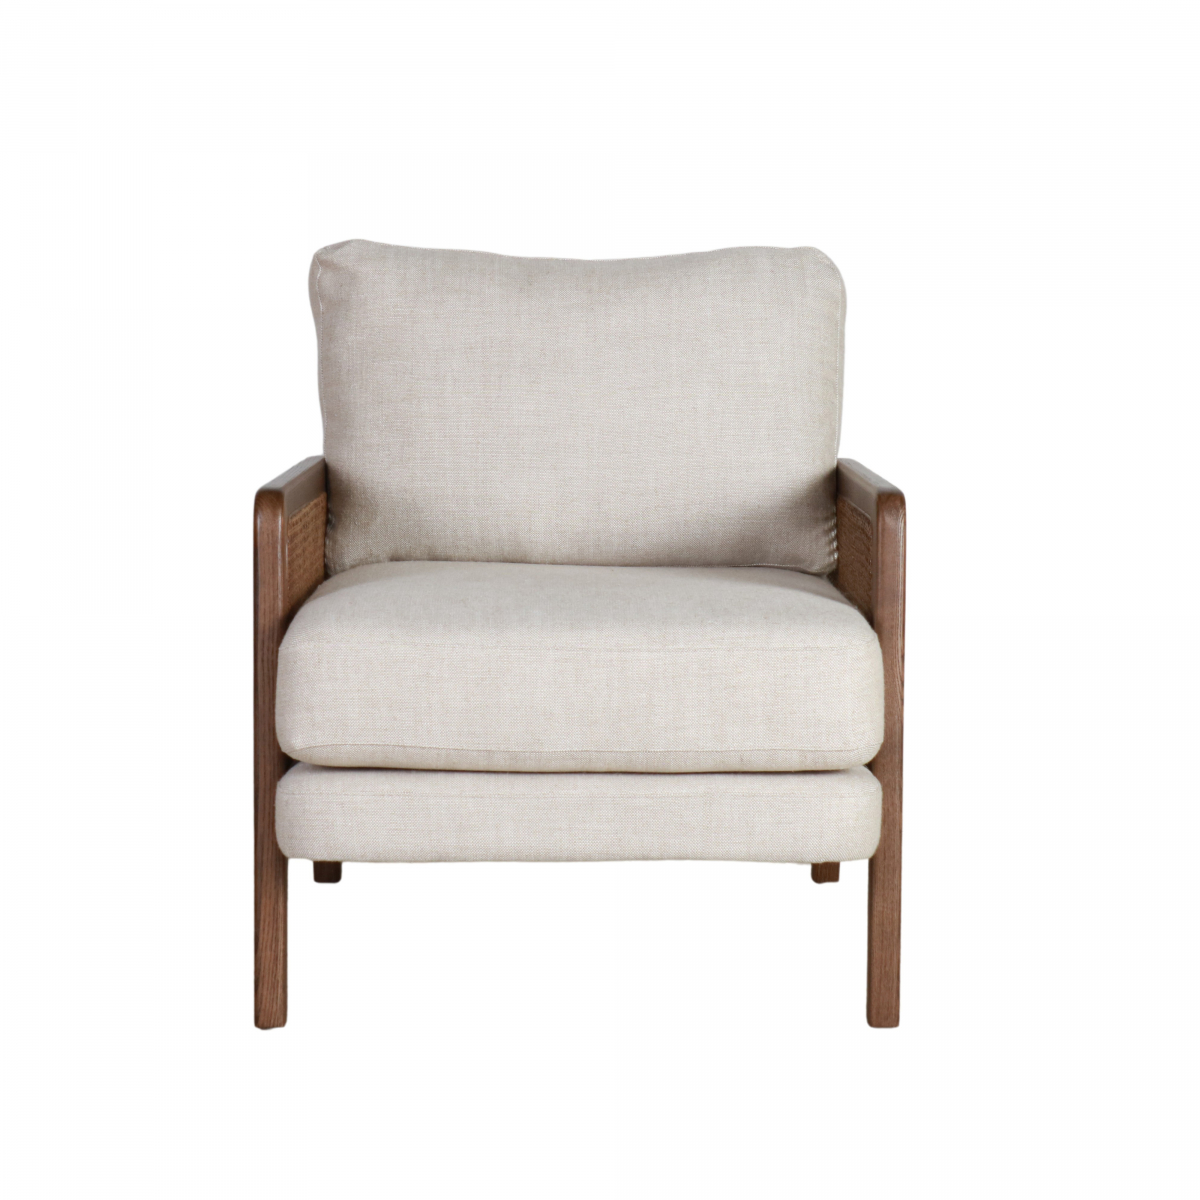 Modern armchair in cream with rattan inlay on arms